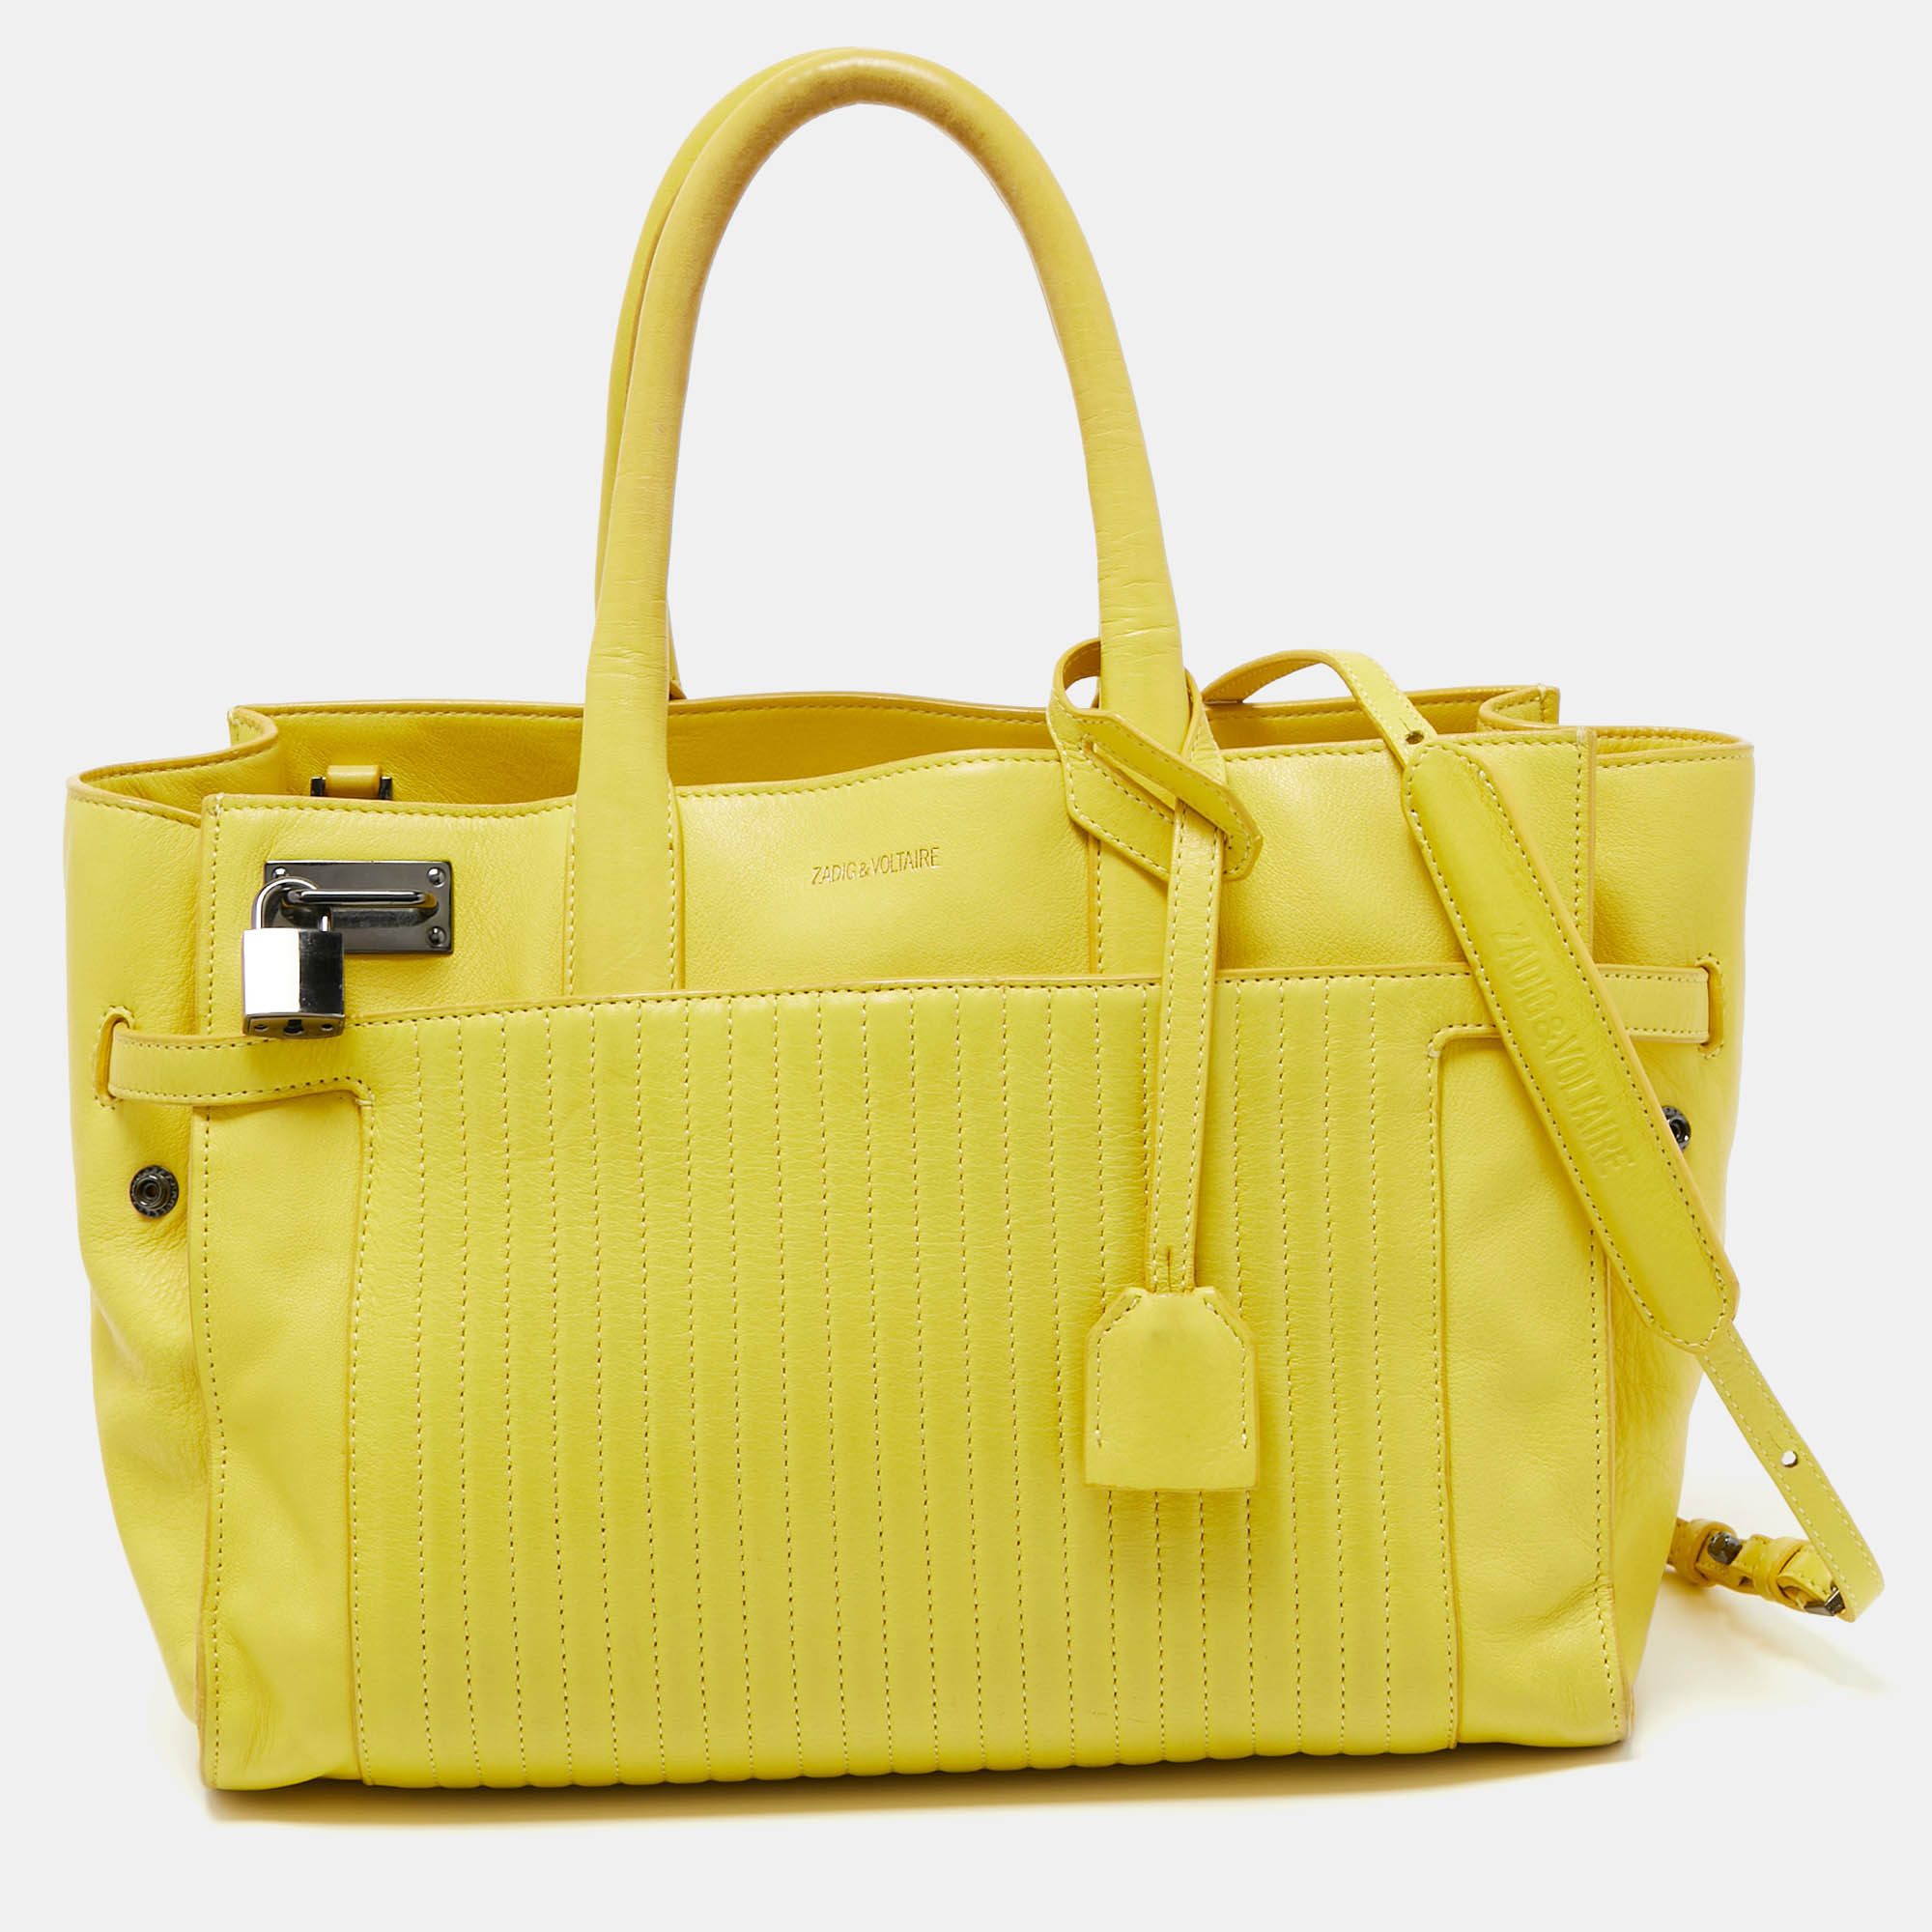 Zadig & voltaire yellow leather medium candide tote